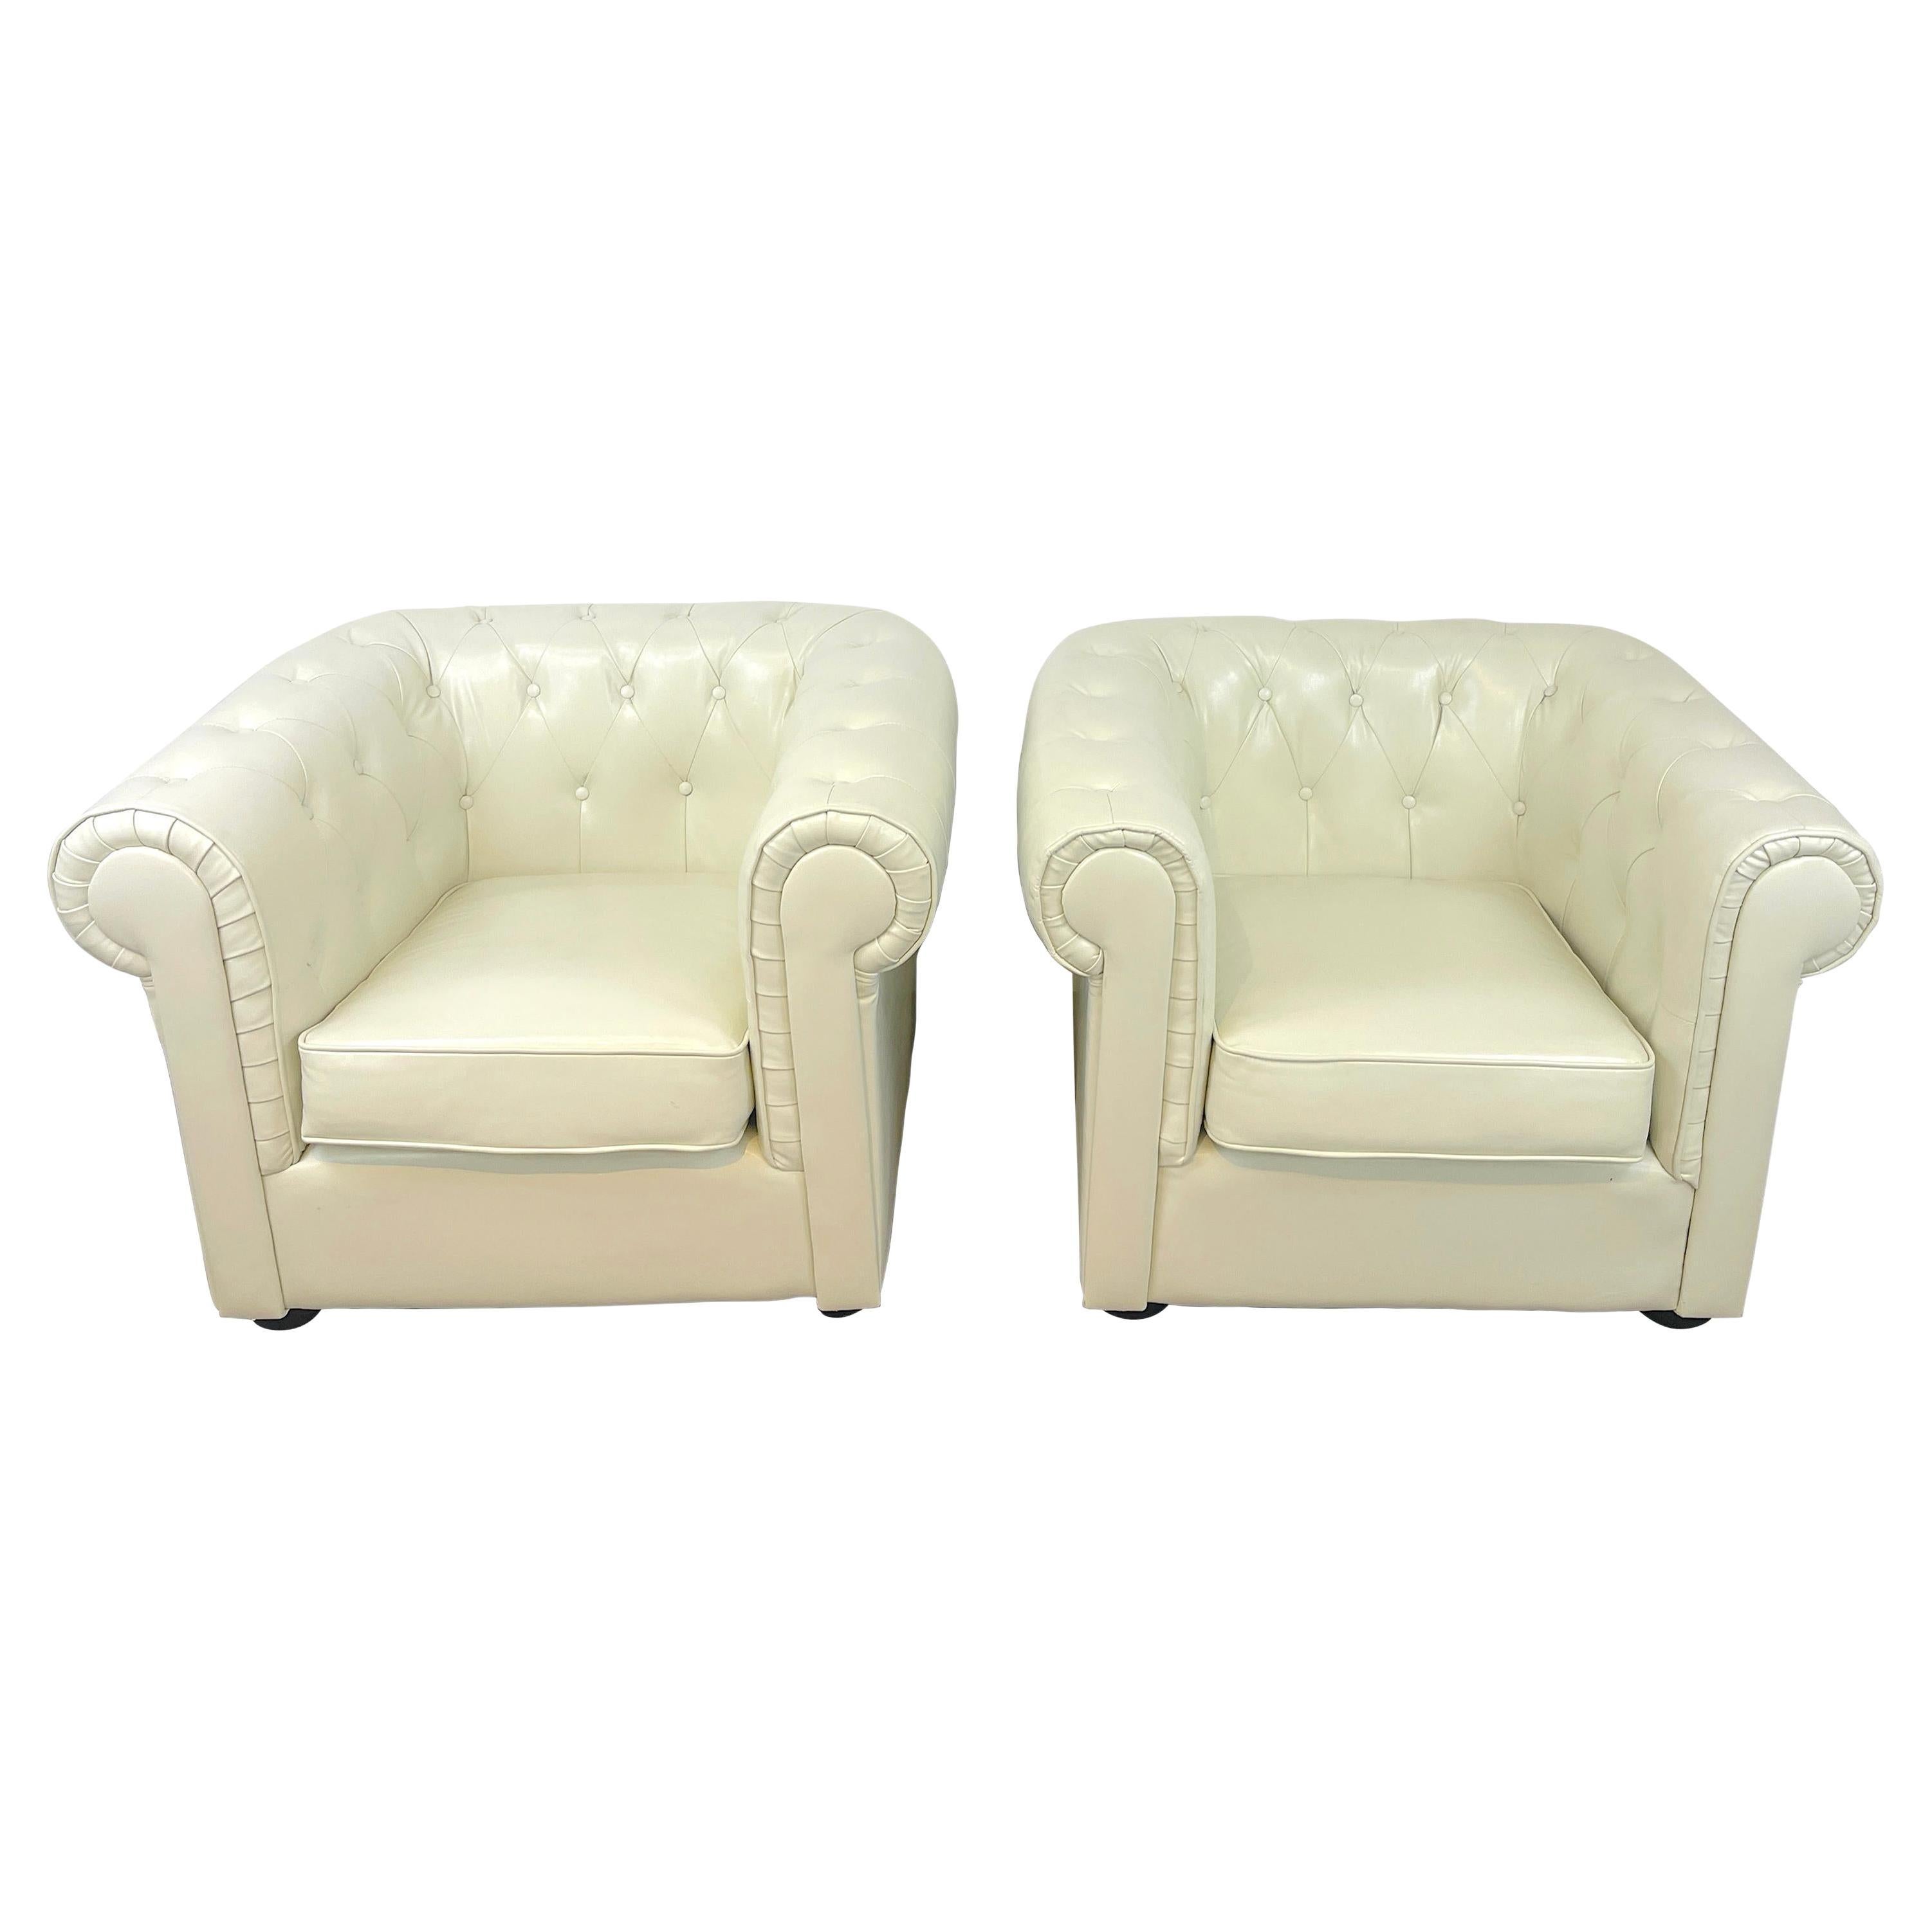 Pair of White Leather Chesterfield Club Chairs For Sale